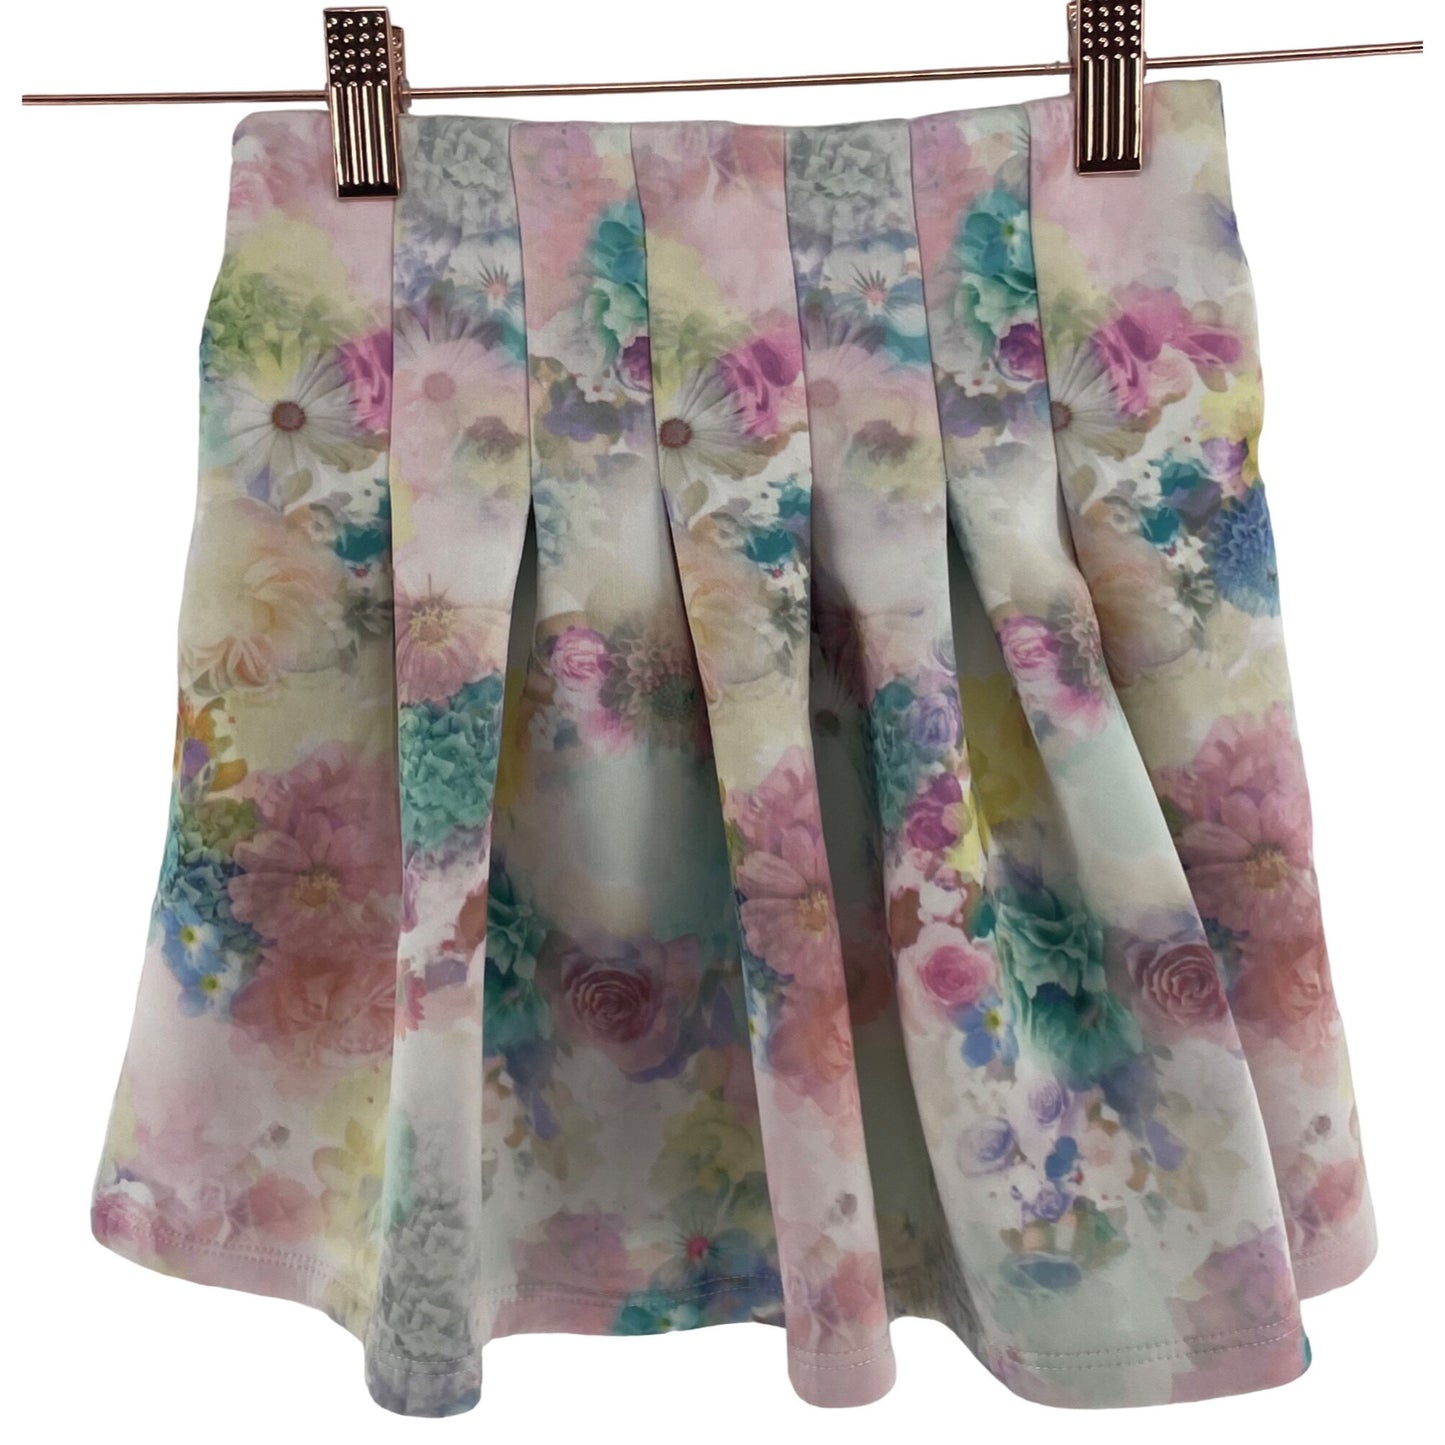 H&M Girl's Size 6-8 Pastel Multi-Colored Floral A-Line Pleated Mini Skirt